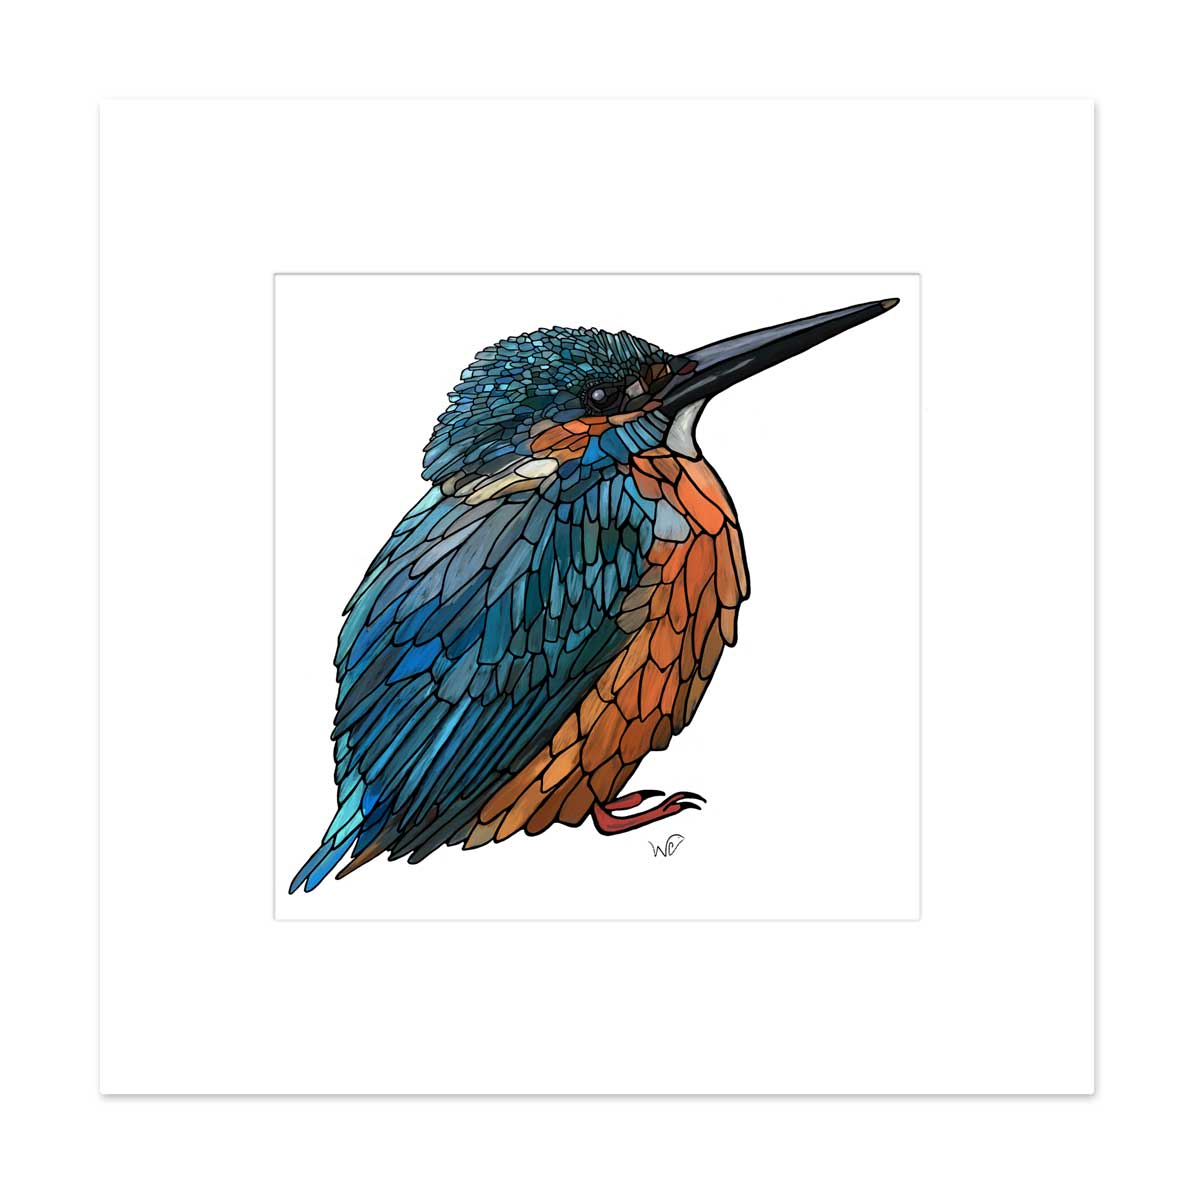 Signed & Matted Print - Kingfisher